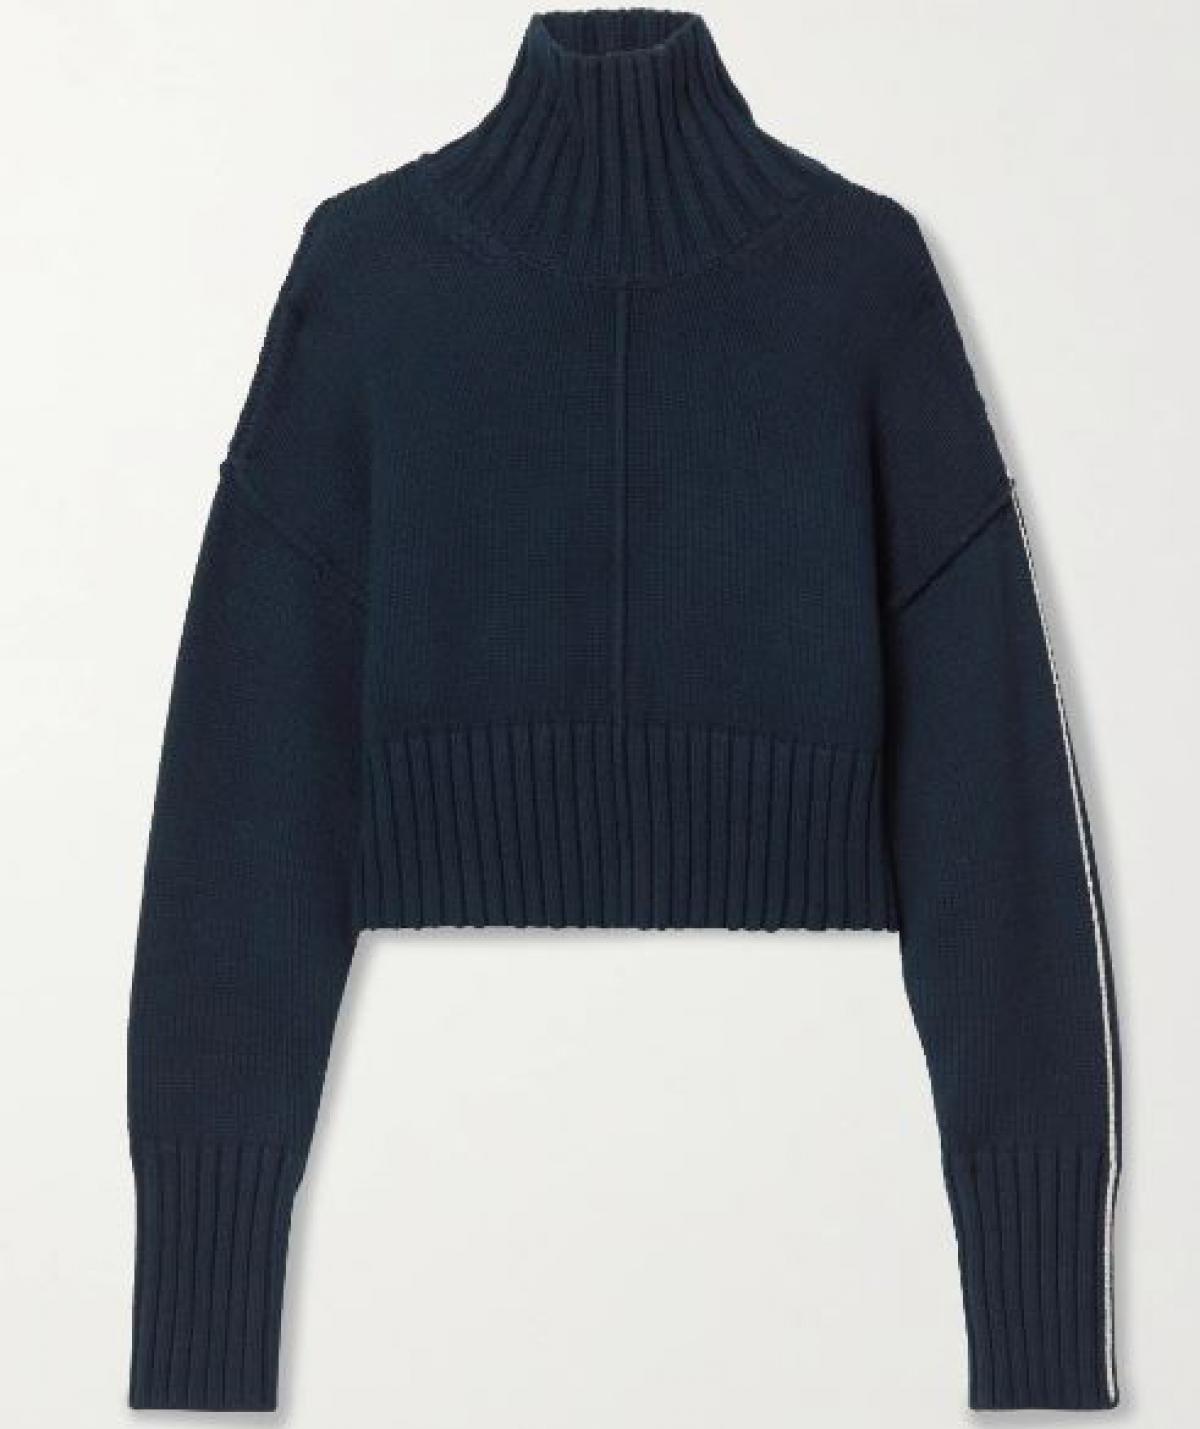 Cropped pul met turtle neck in donkerblauw